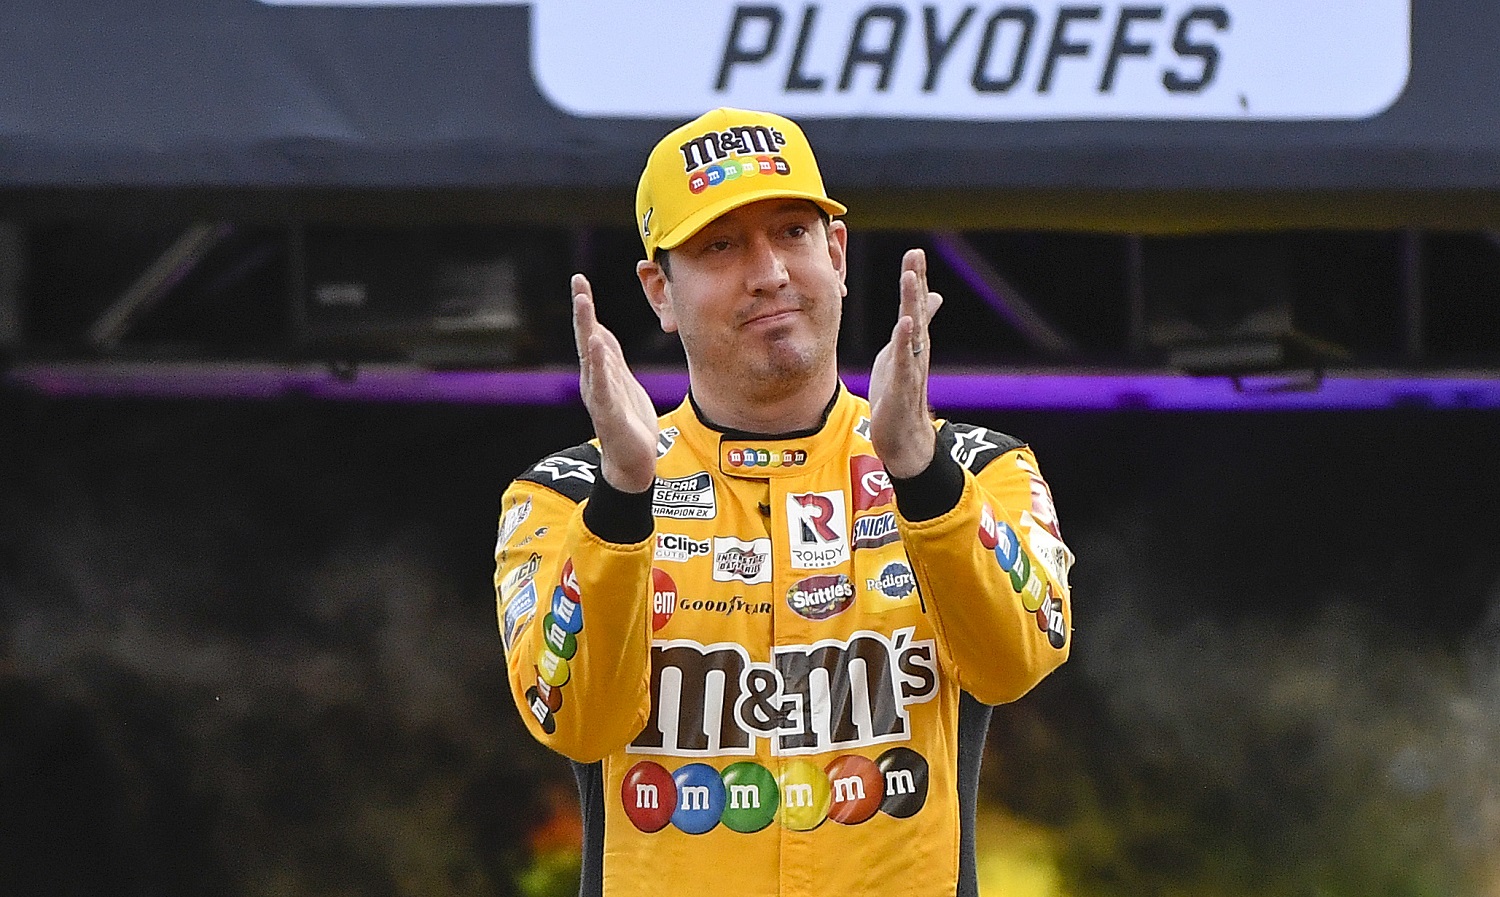 Kyle Busch walks onstage during driver intros for the NASCAR Cup Series Bass Pro Shops Night Race at Bristol Motor Speedway on Sept. 17, 2022. | Logan Riely/Getty Images